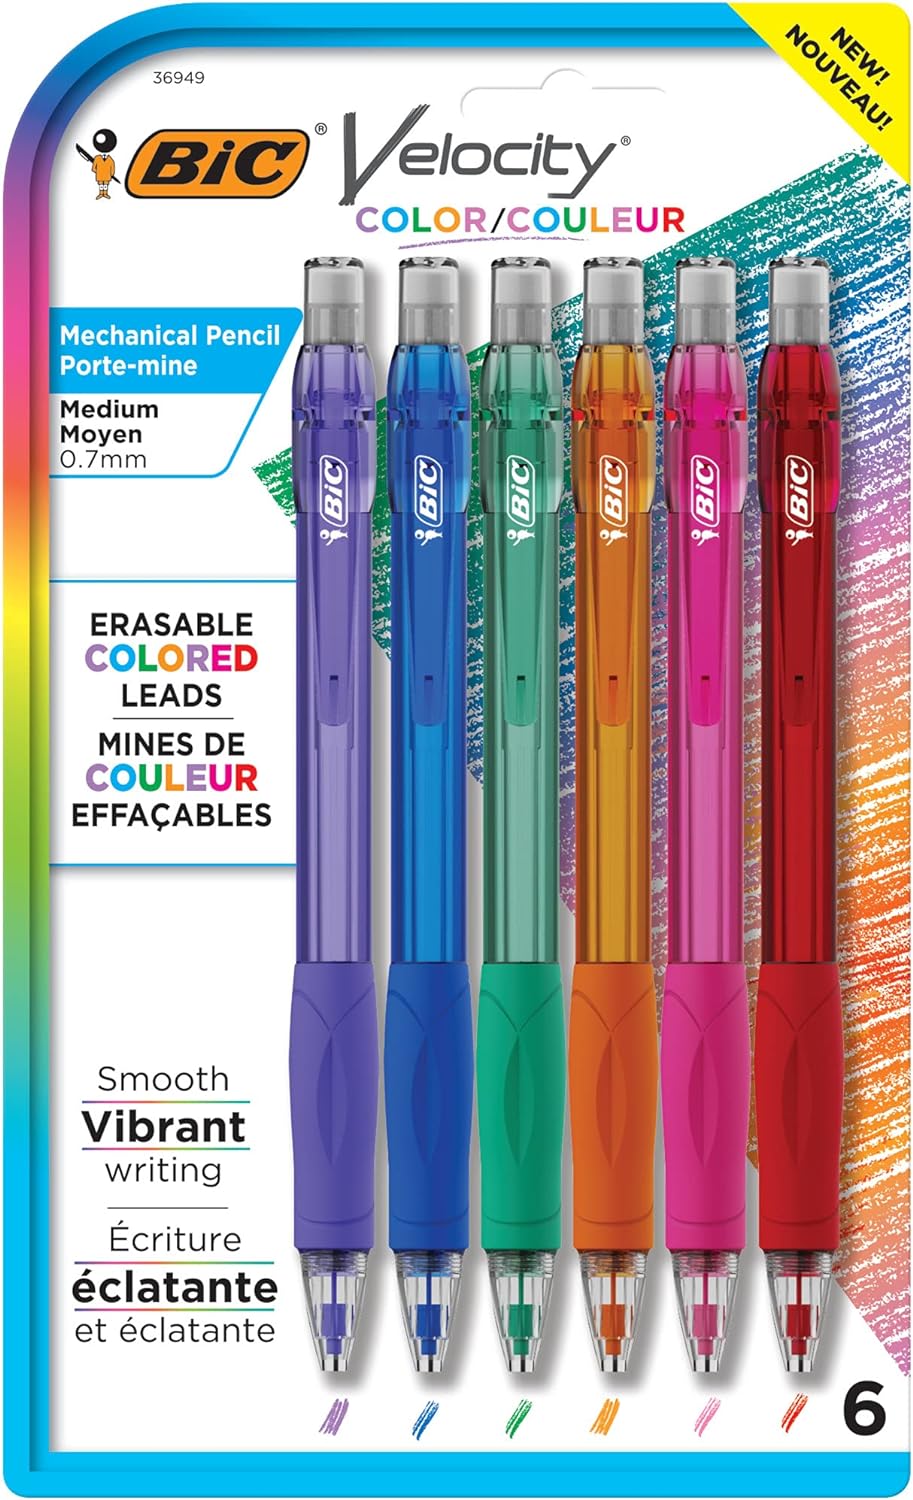 BIC Velocity Mechanical Pencils with Colored Leads, Medium Point (0.7 mm), 6-Count Pack, Perfect for Drawing and Journaling (MV7CP61-AST)